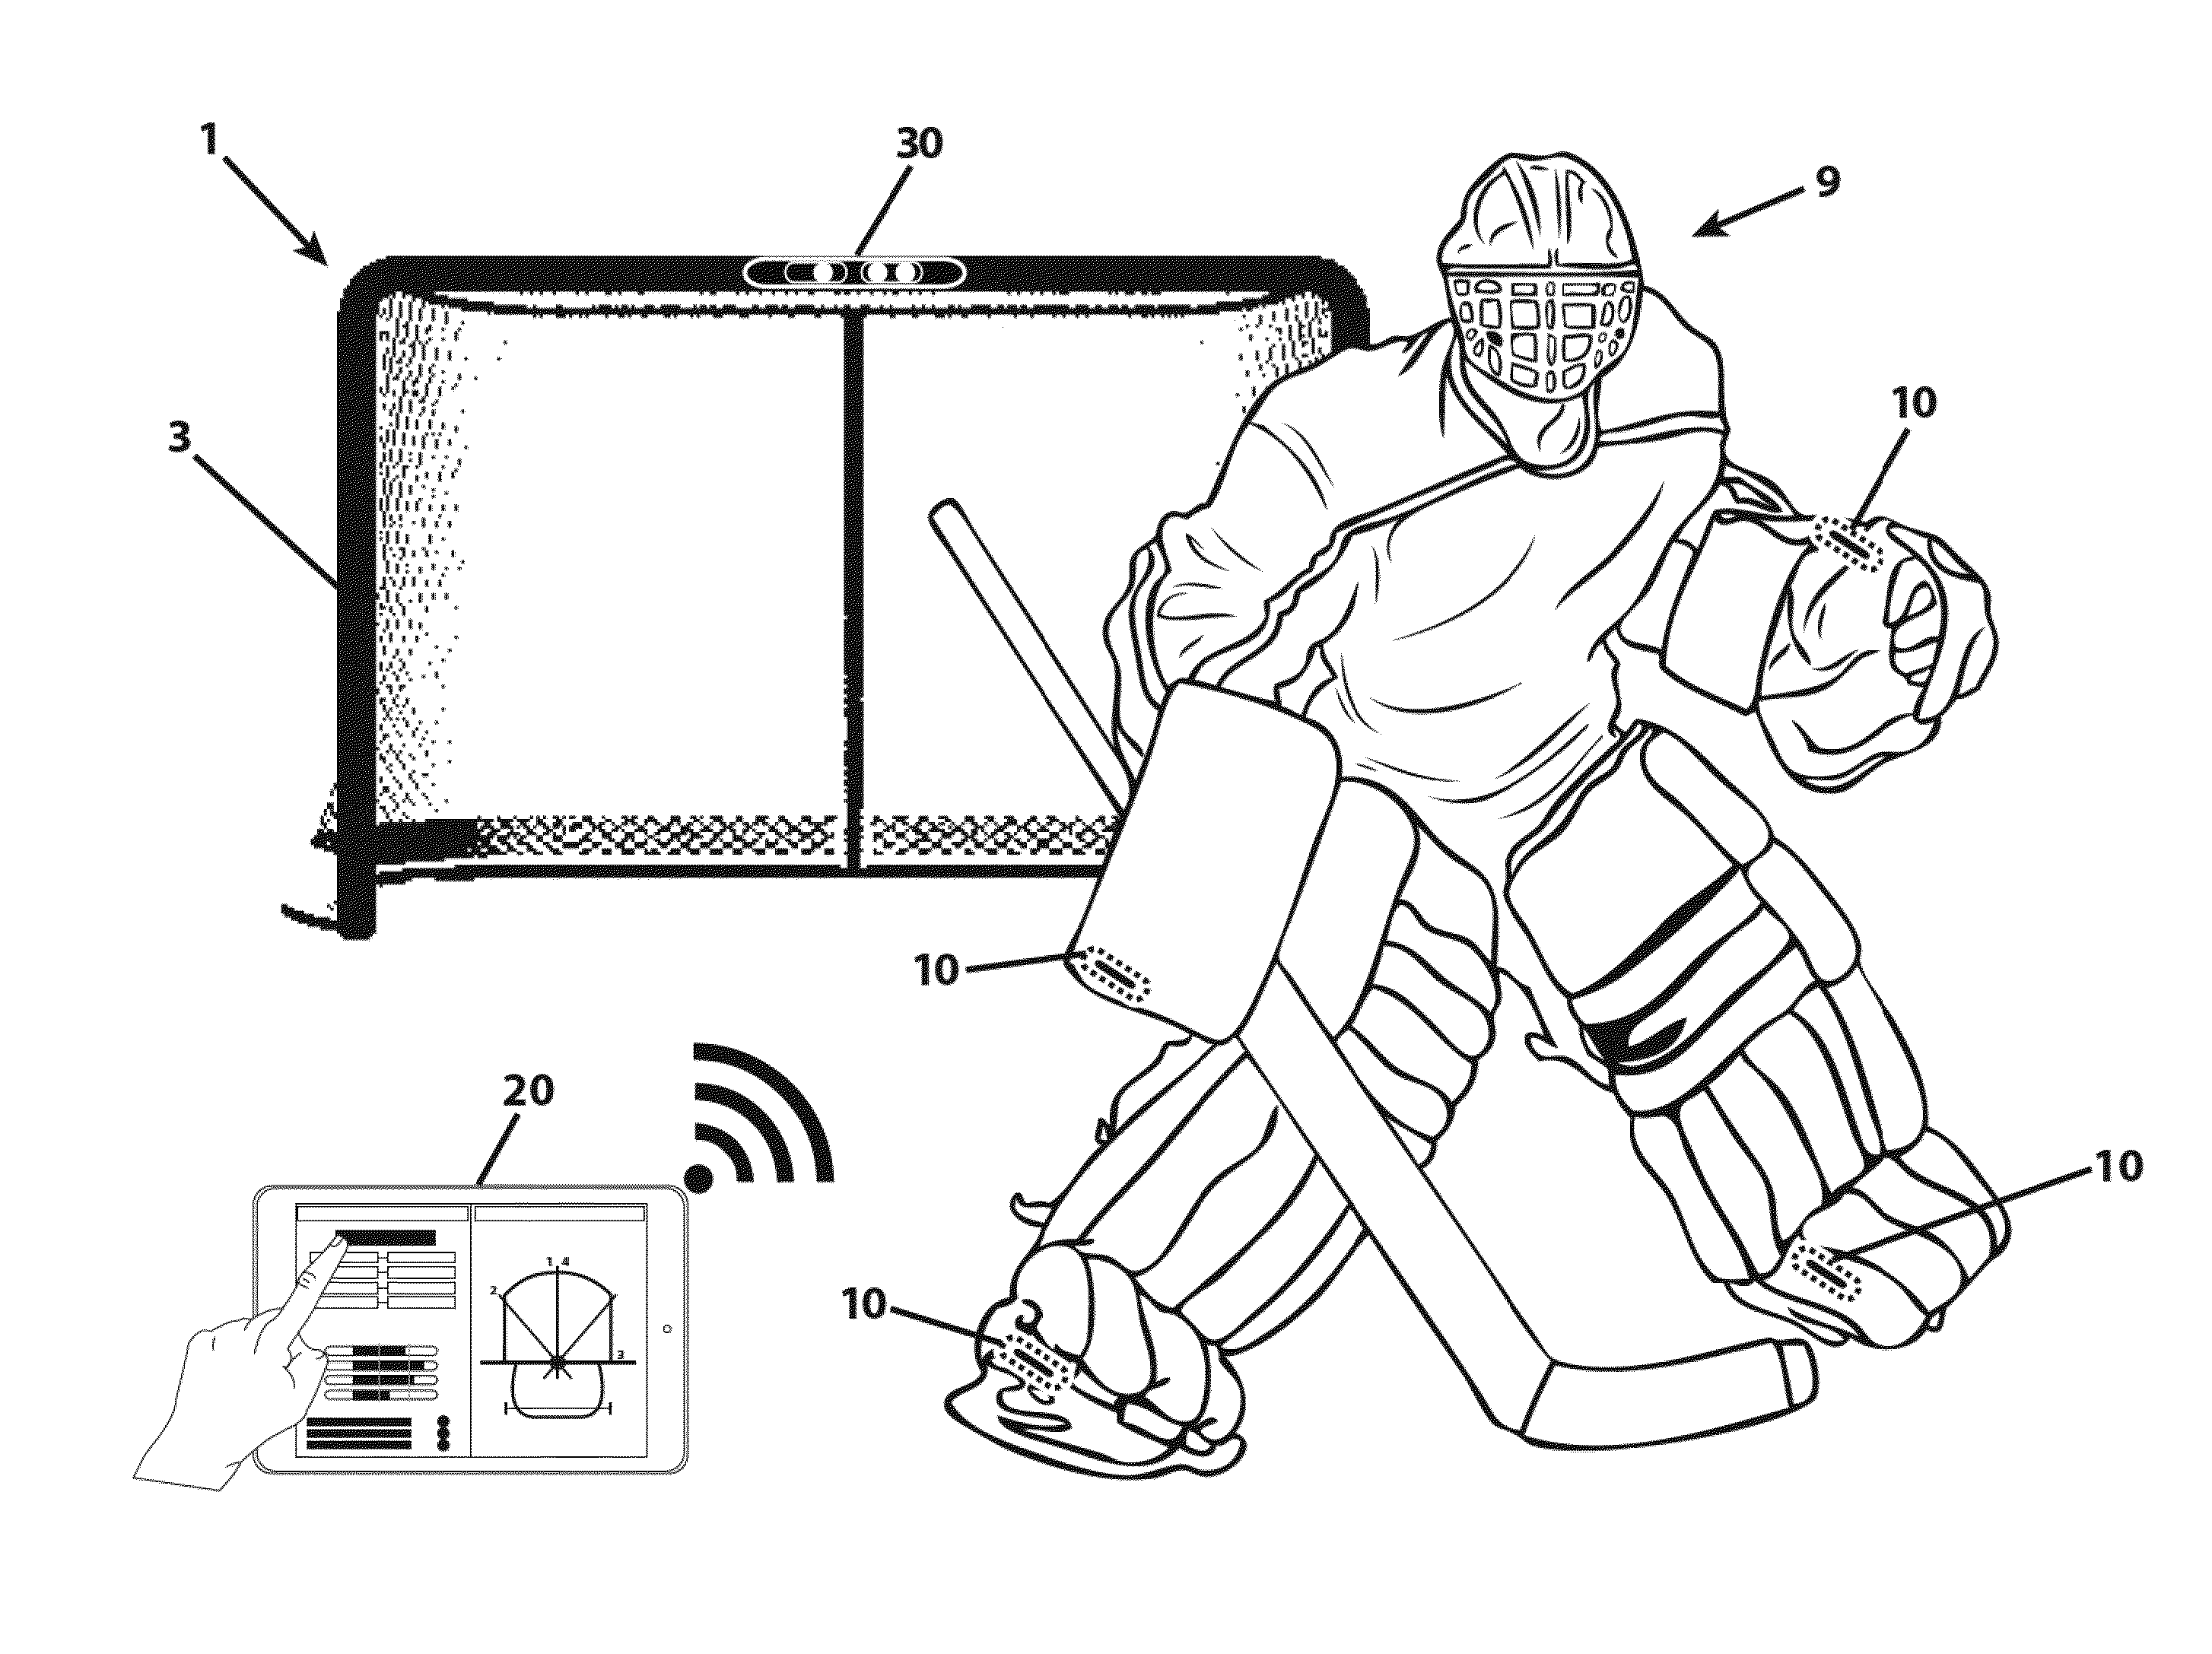 Methods and apparatus for goaltending applications including collecting performance metrics, video and sensor analysis